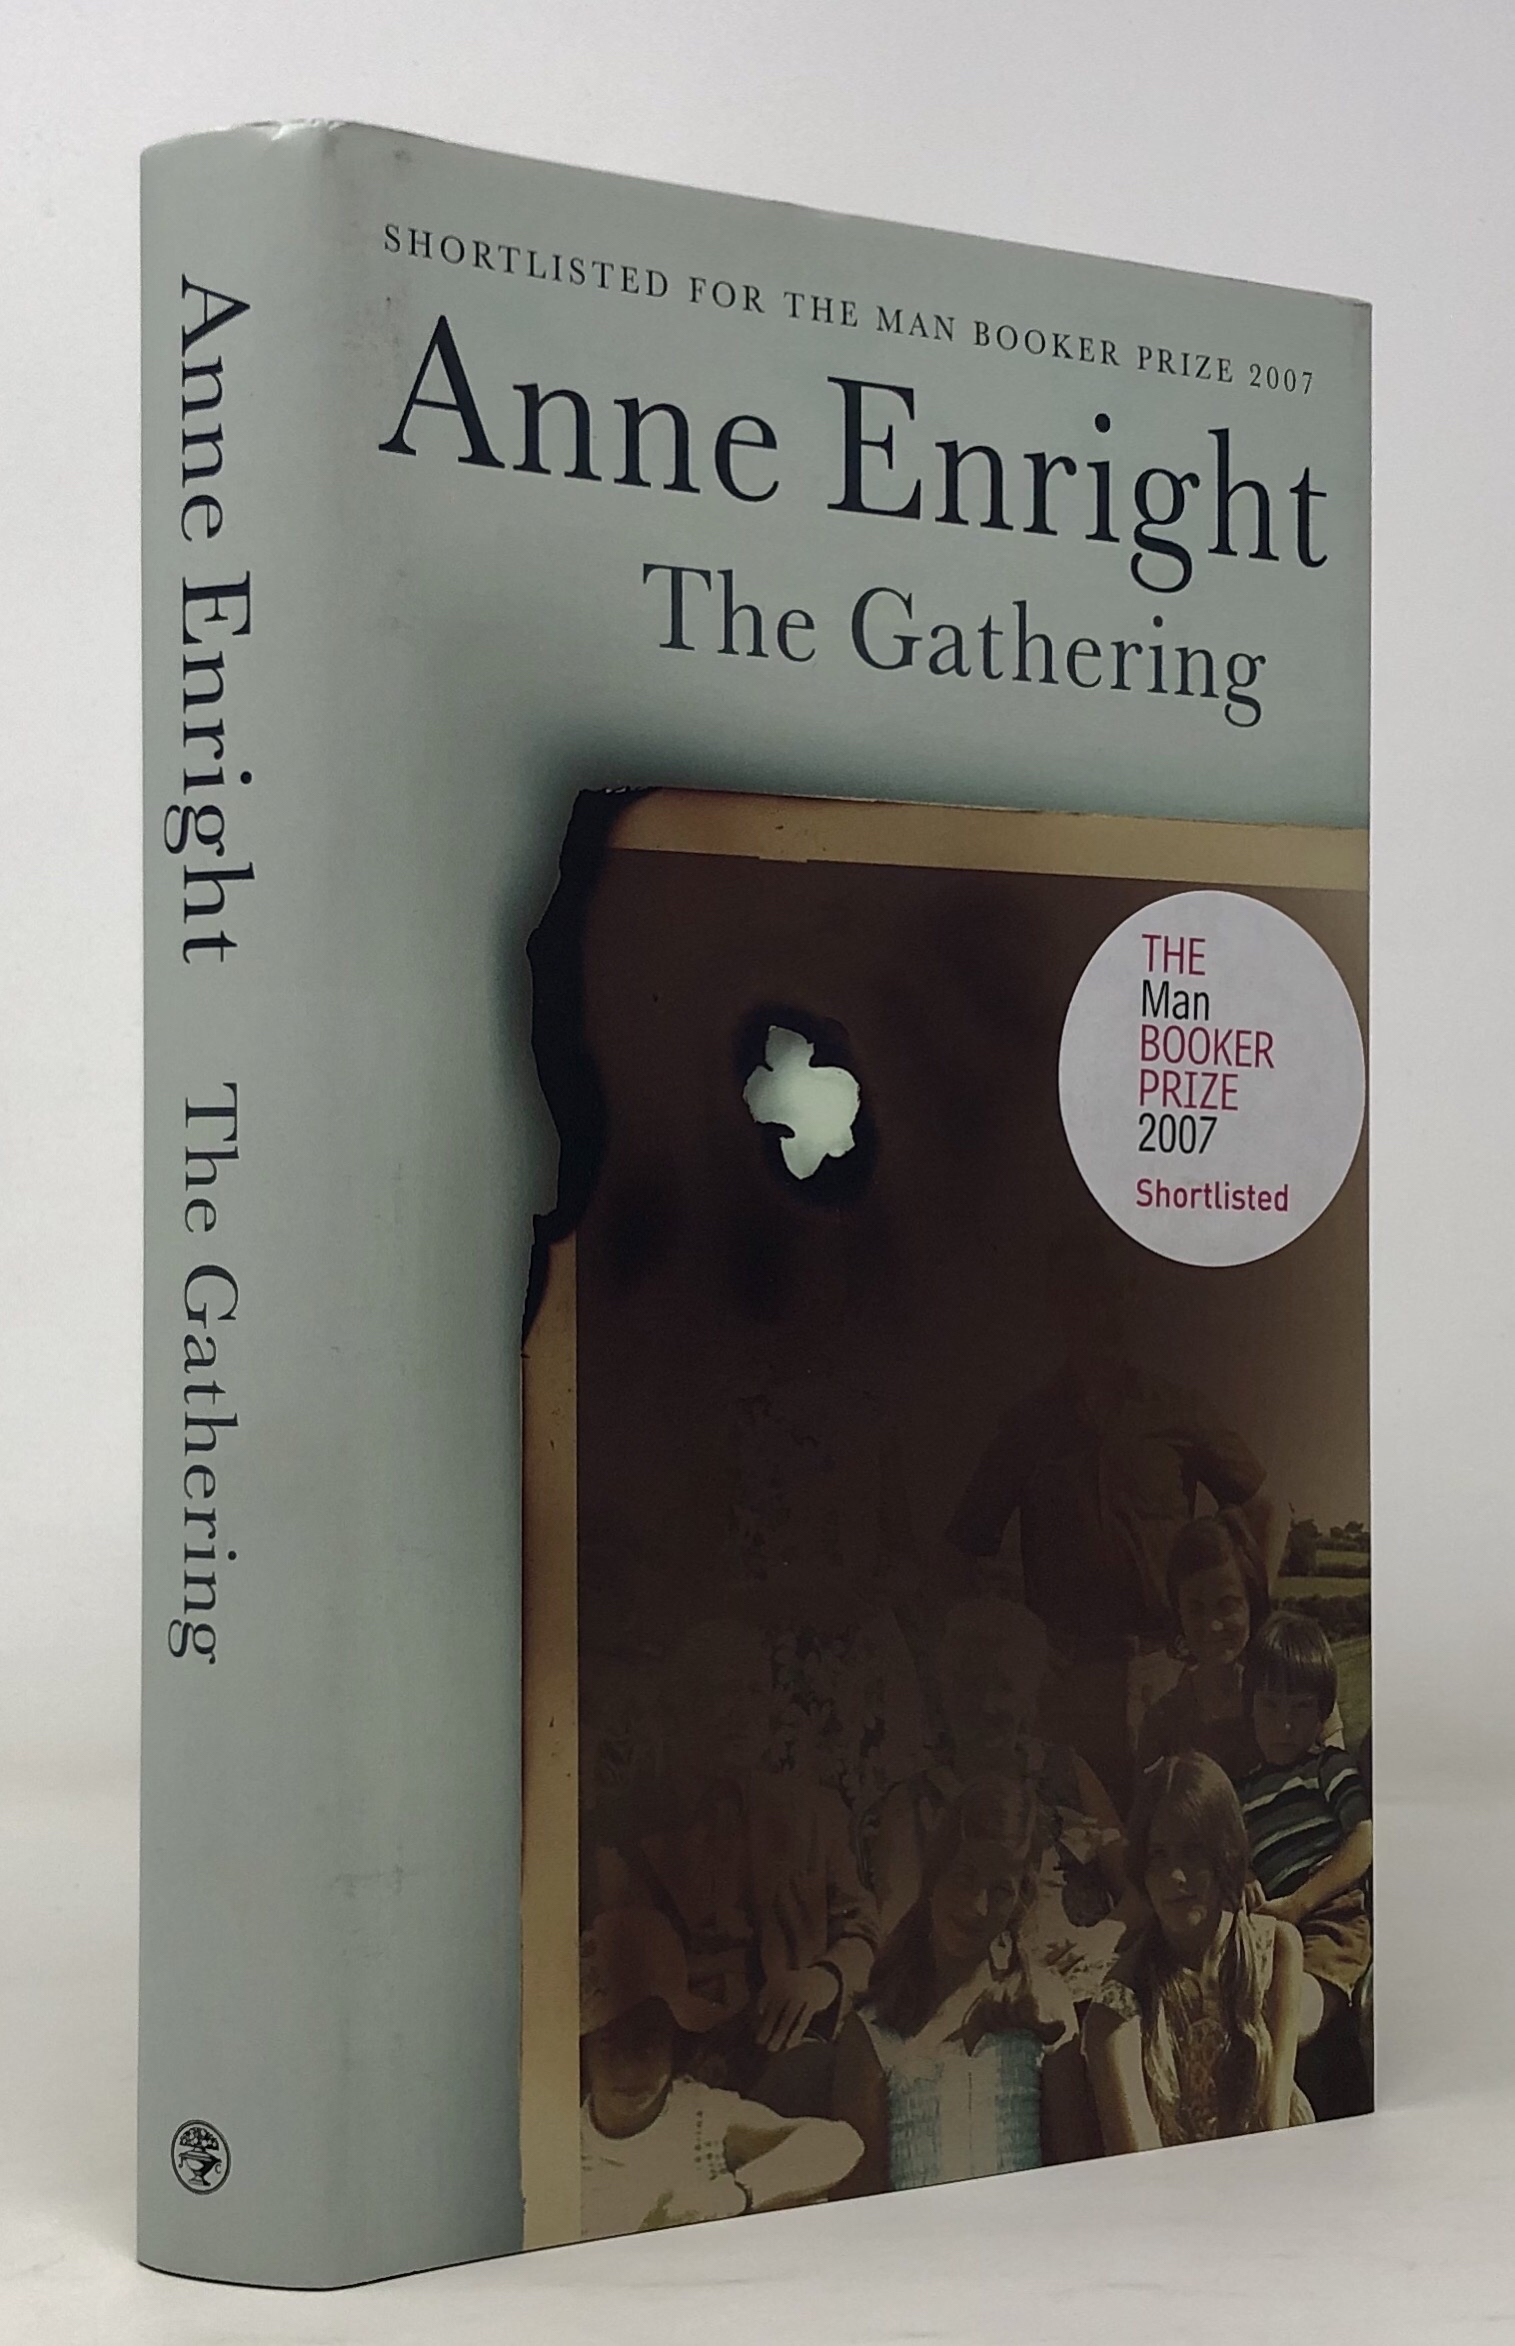 The Gathering - ENRIGHT Anne